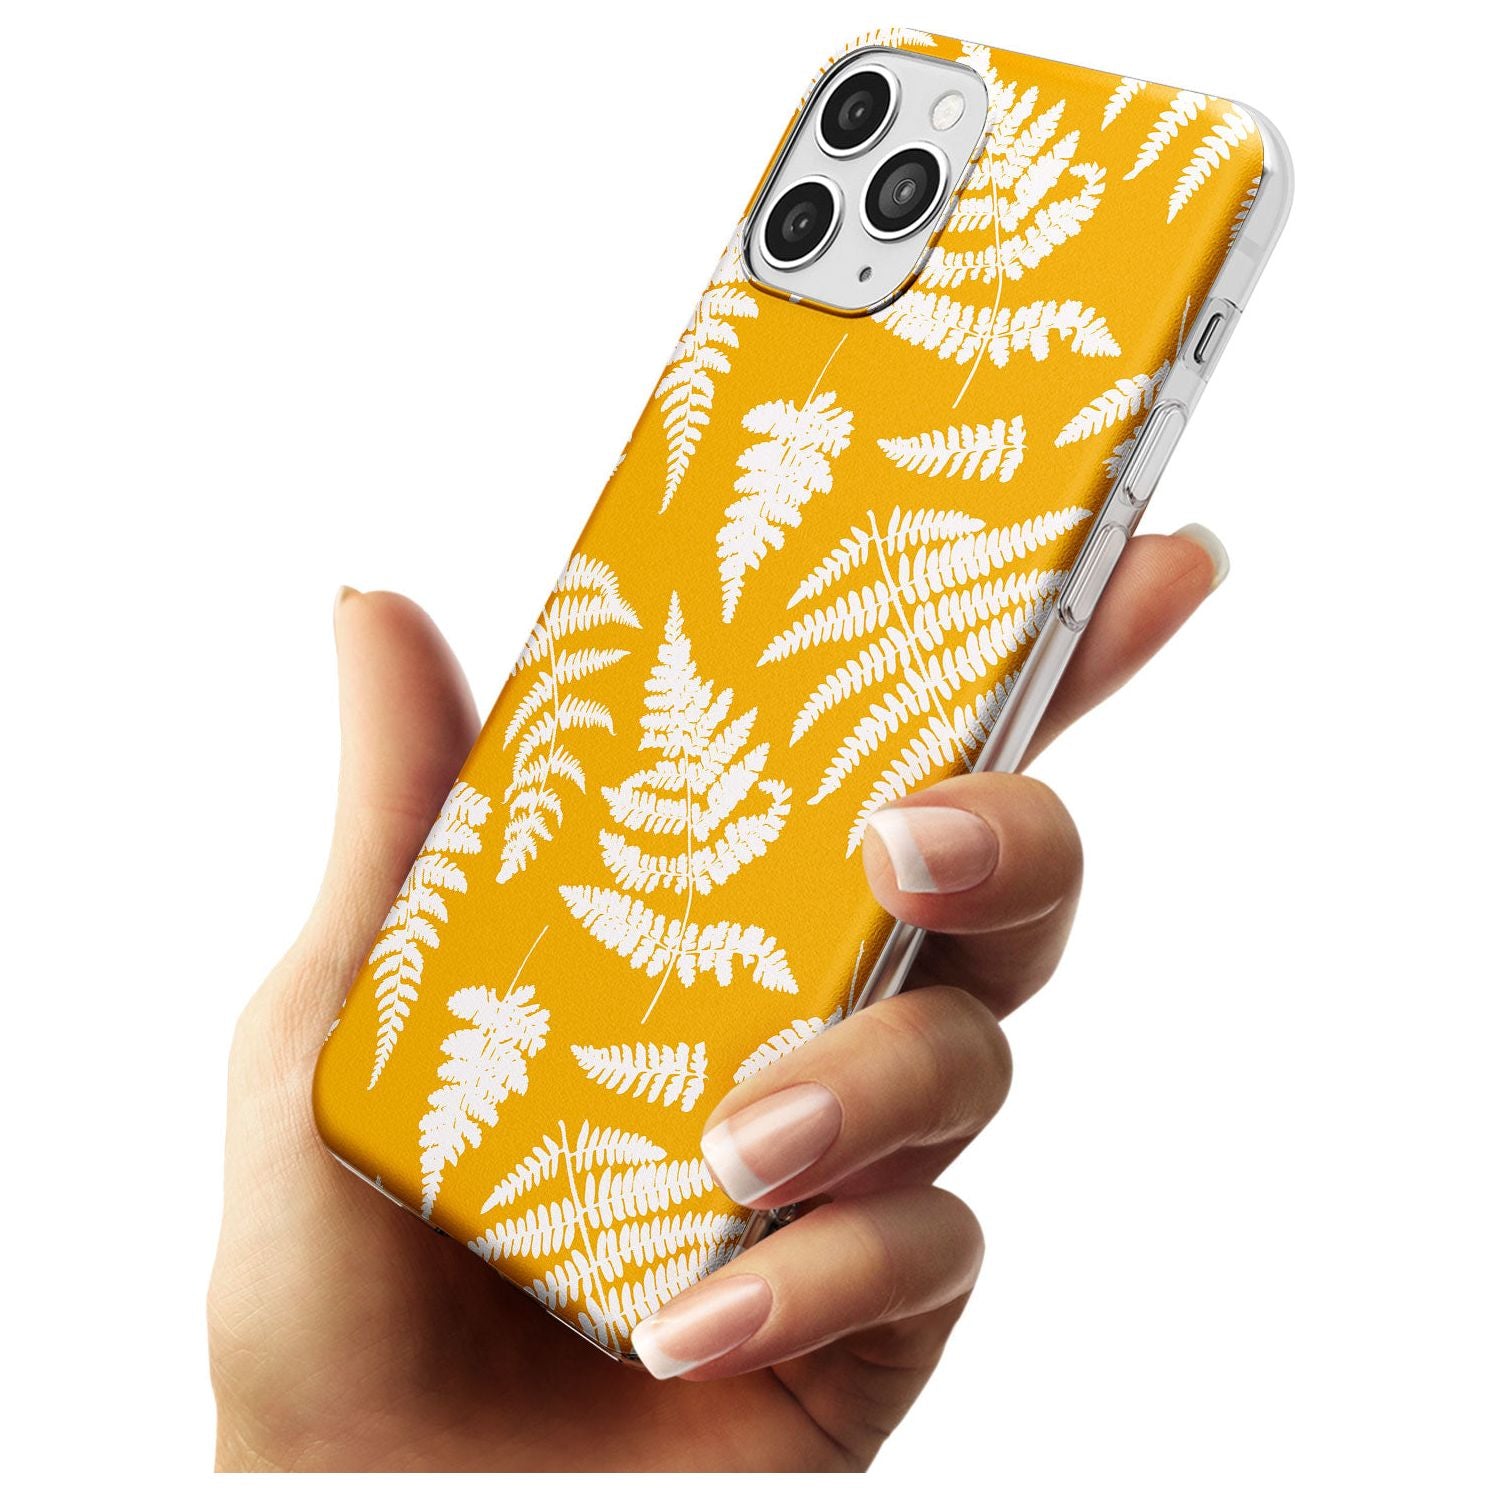 Fern Pattern on Yellow Slim TPU Phone Case for iPhone 11 Pro Max